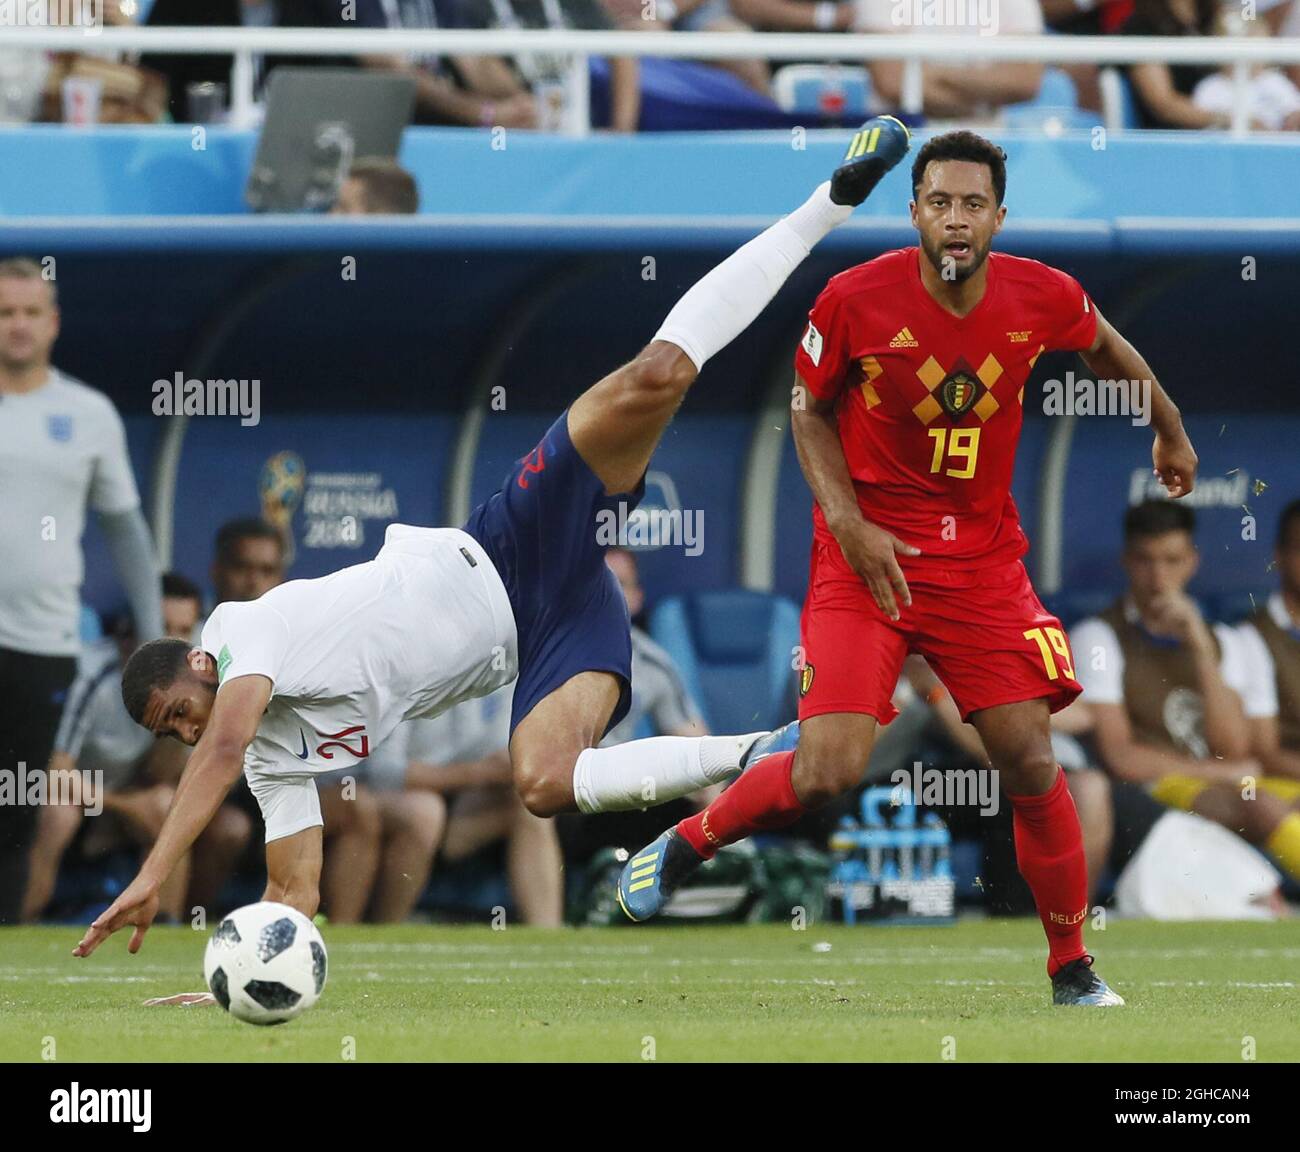 Ruben Loftus-Cheek of England  tackled by Moussa Dembele of Belgium during the FIFA World Cup 2018 Group G match at the Kaliningrad Stadium, Kaliningrad. Picture date 28th June 2018. Picture credit should read: David Klein/Sportimage via PA Images Stock Photo